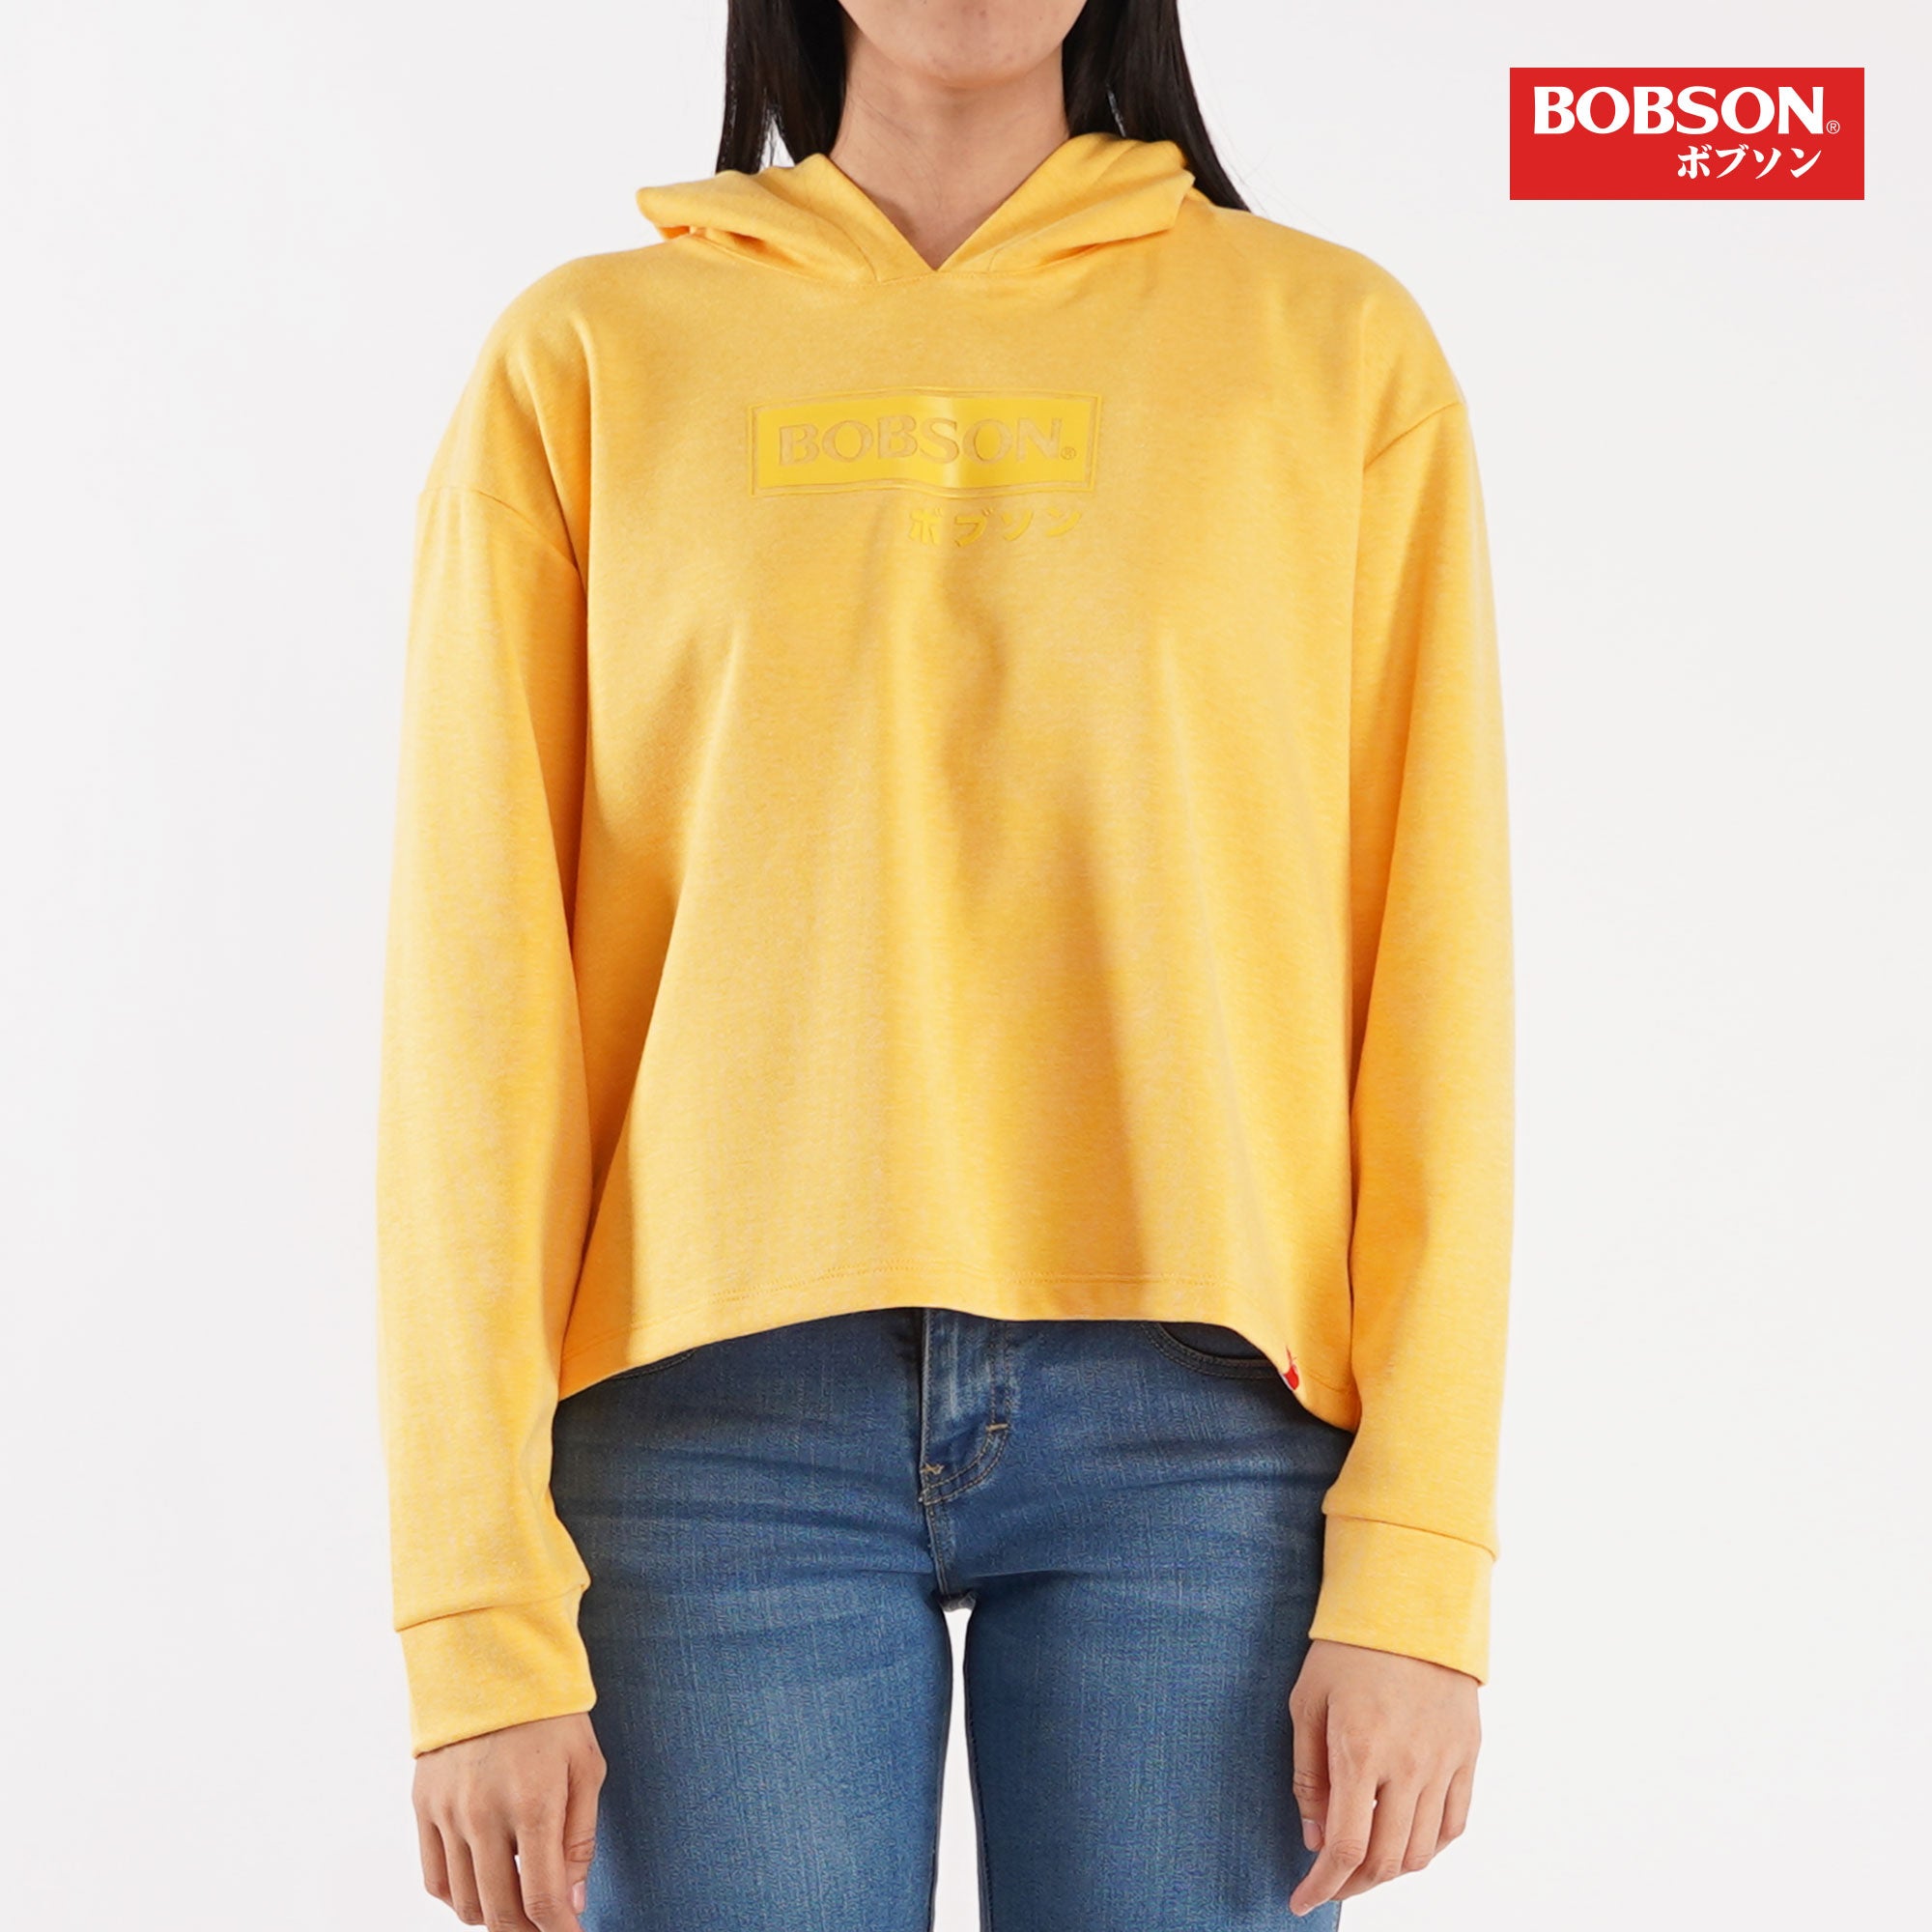 Bobson Japanese Ladies Basic Hoodie Pullover Long sleeves Crop Jacket for Women Trendy Fashion High Quality Apparel Comfortable Casual Jacket for Women 134996 (Yellow)